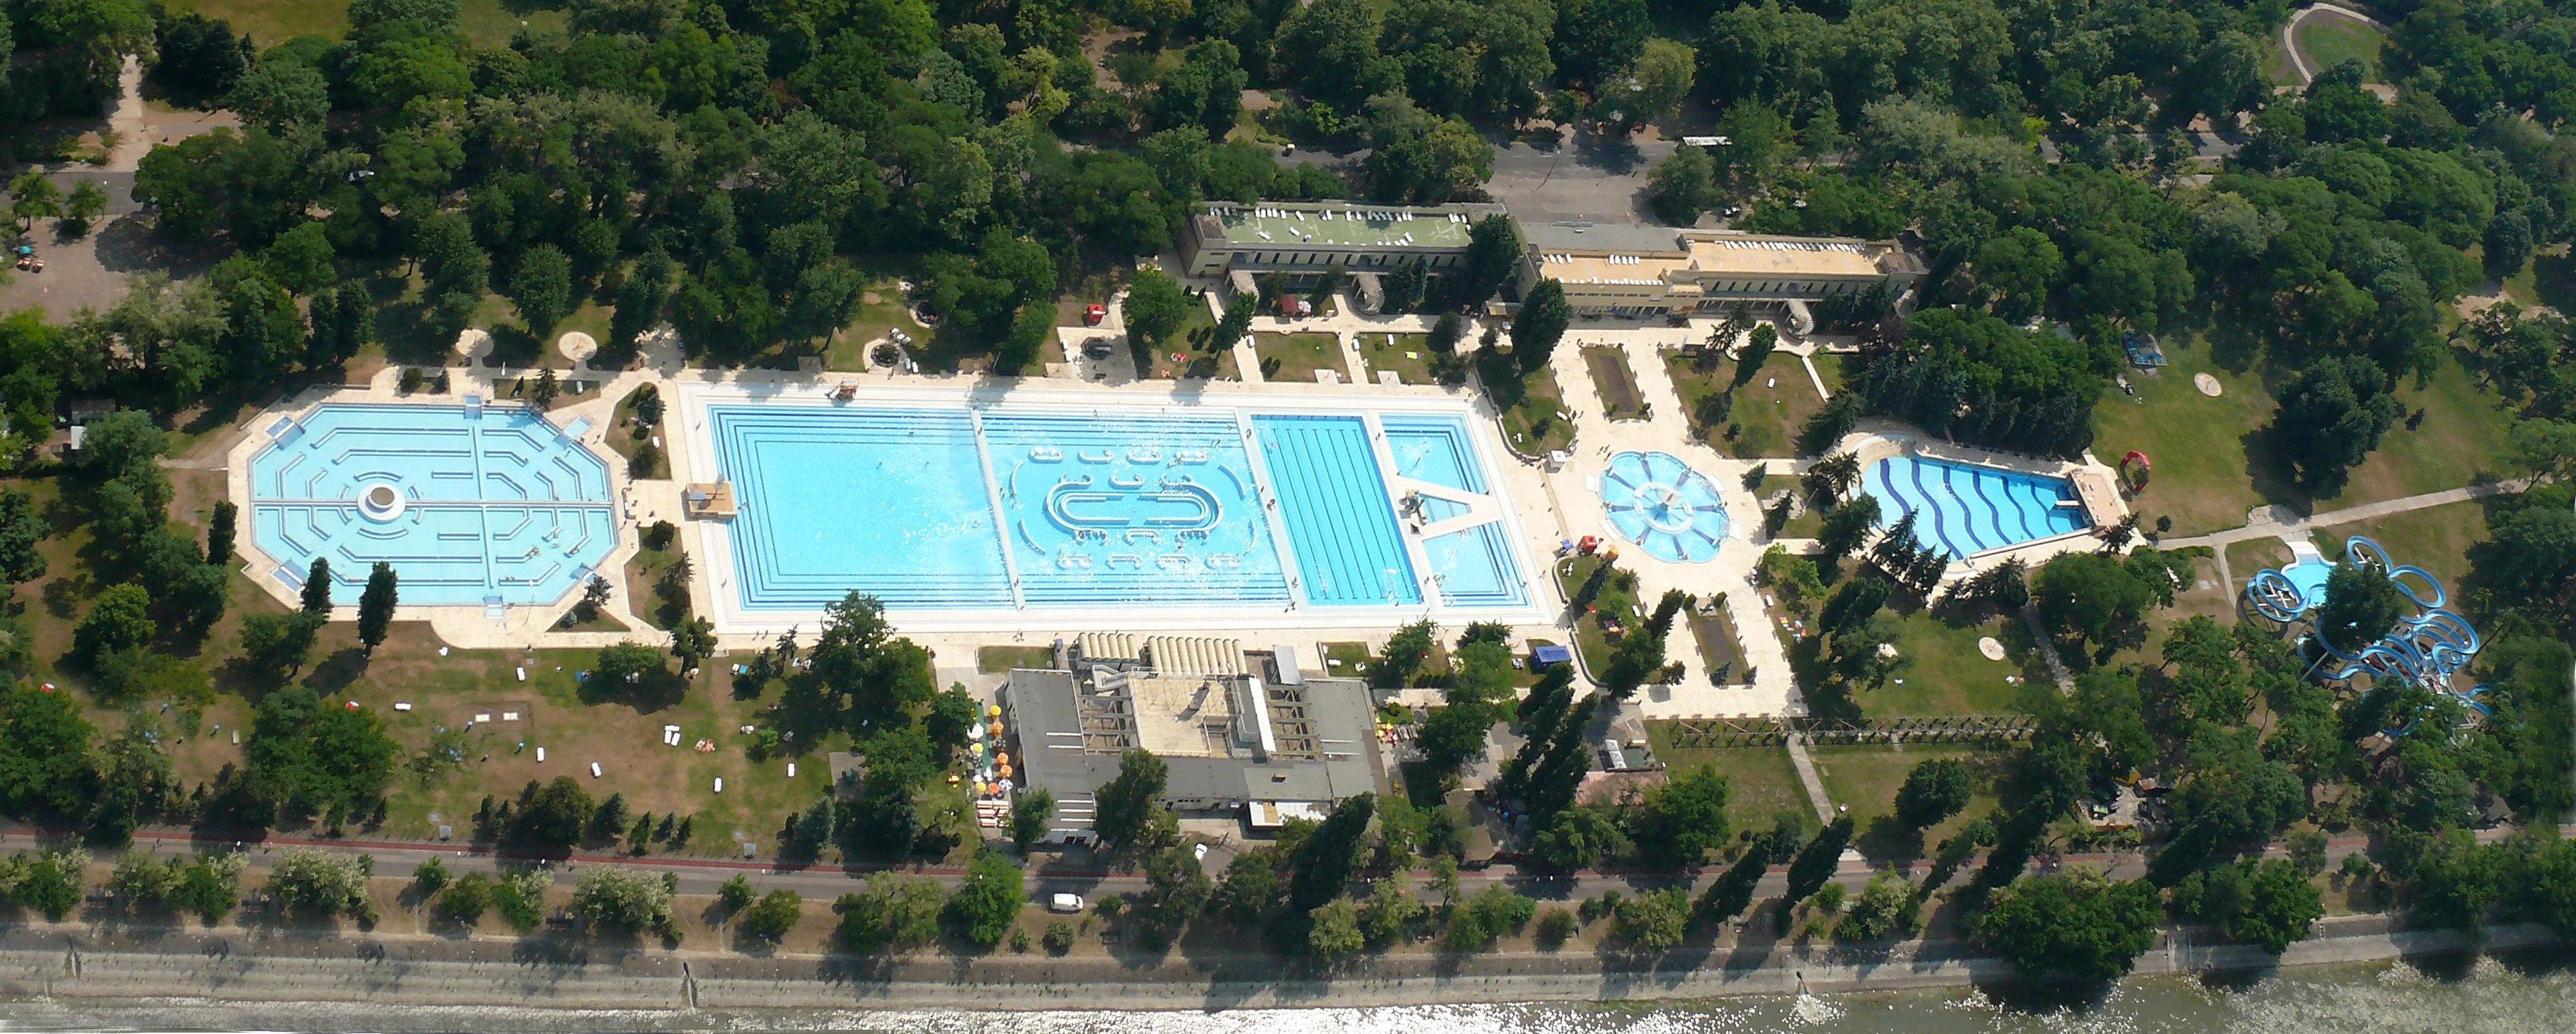 Swimming Complex On Margaret Island in Budapest Under Renovation